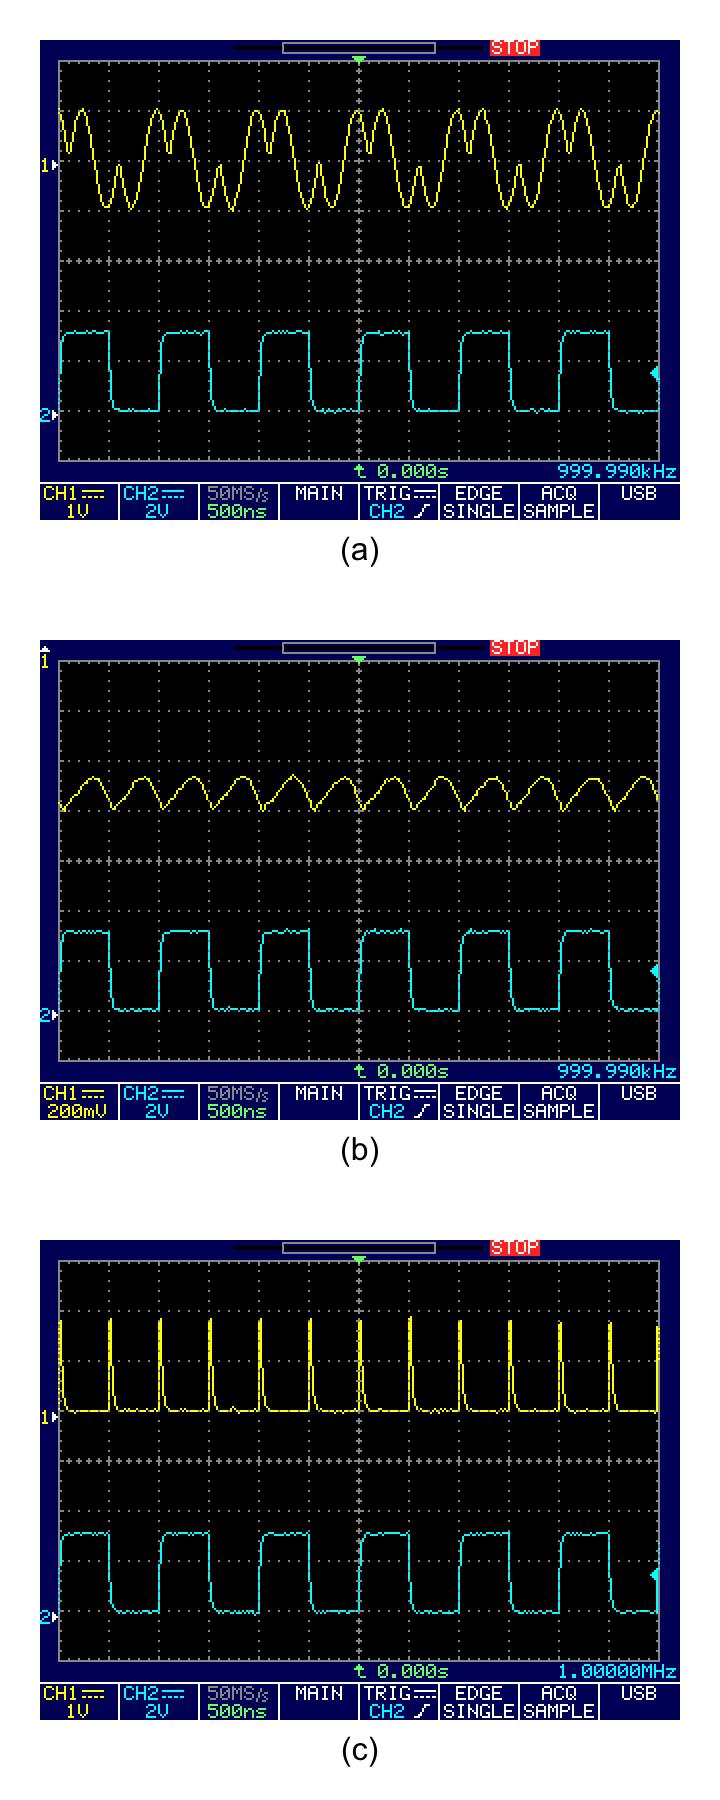 Figure 9 shows some example scope traces for the described test setup. In this test, the carrier signal was modulated with the bitstream 1,0,1,0,1,0, etc.